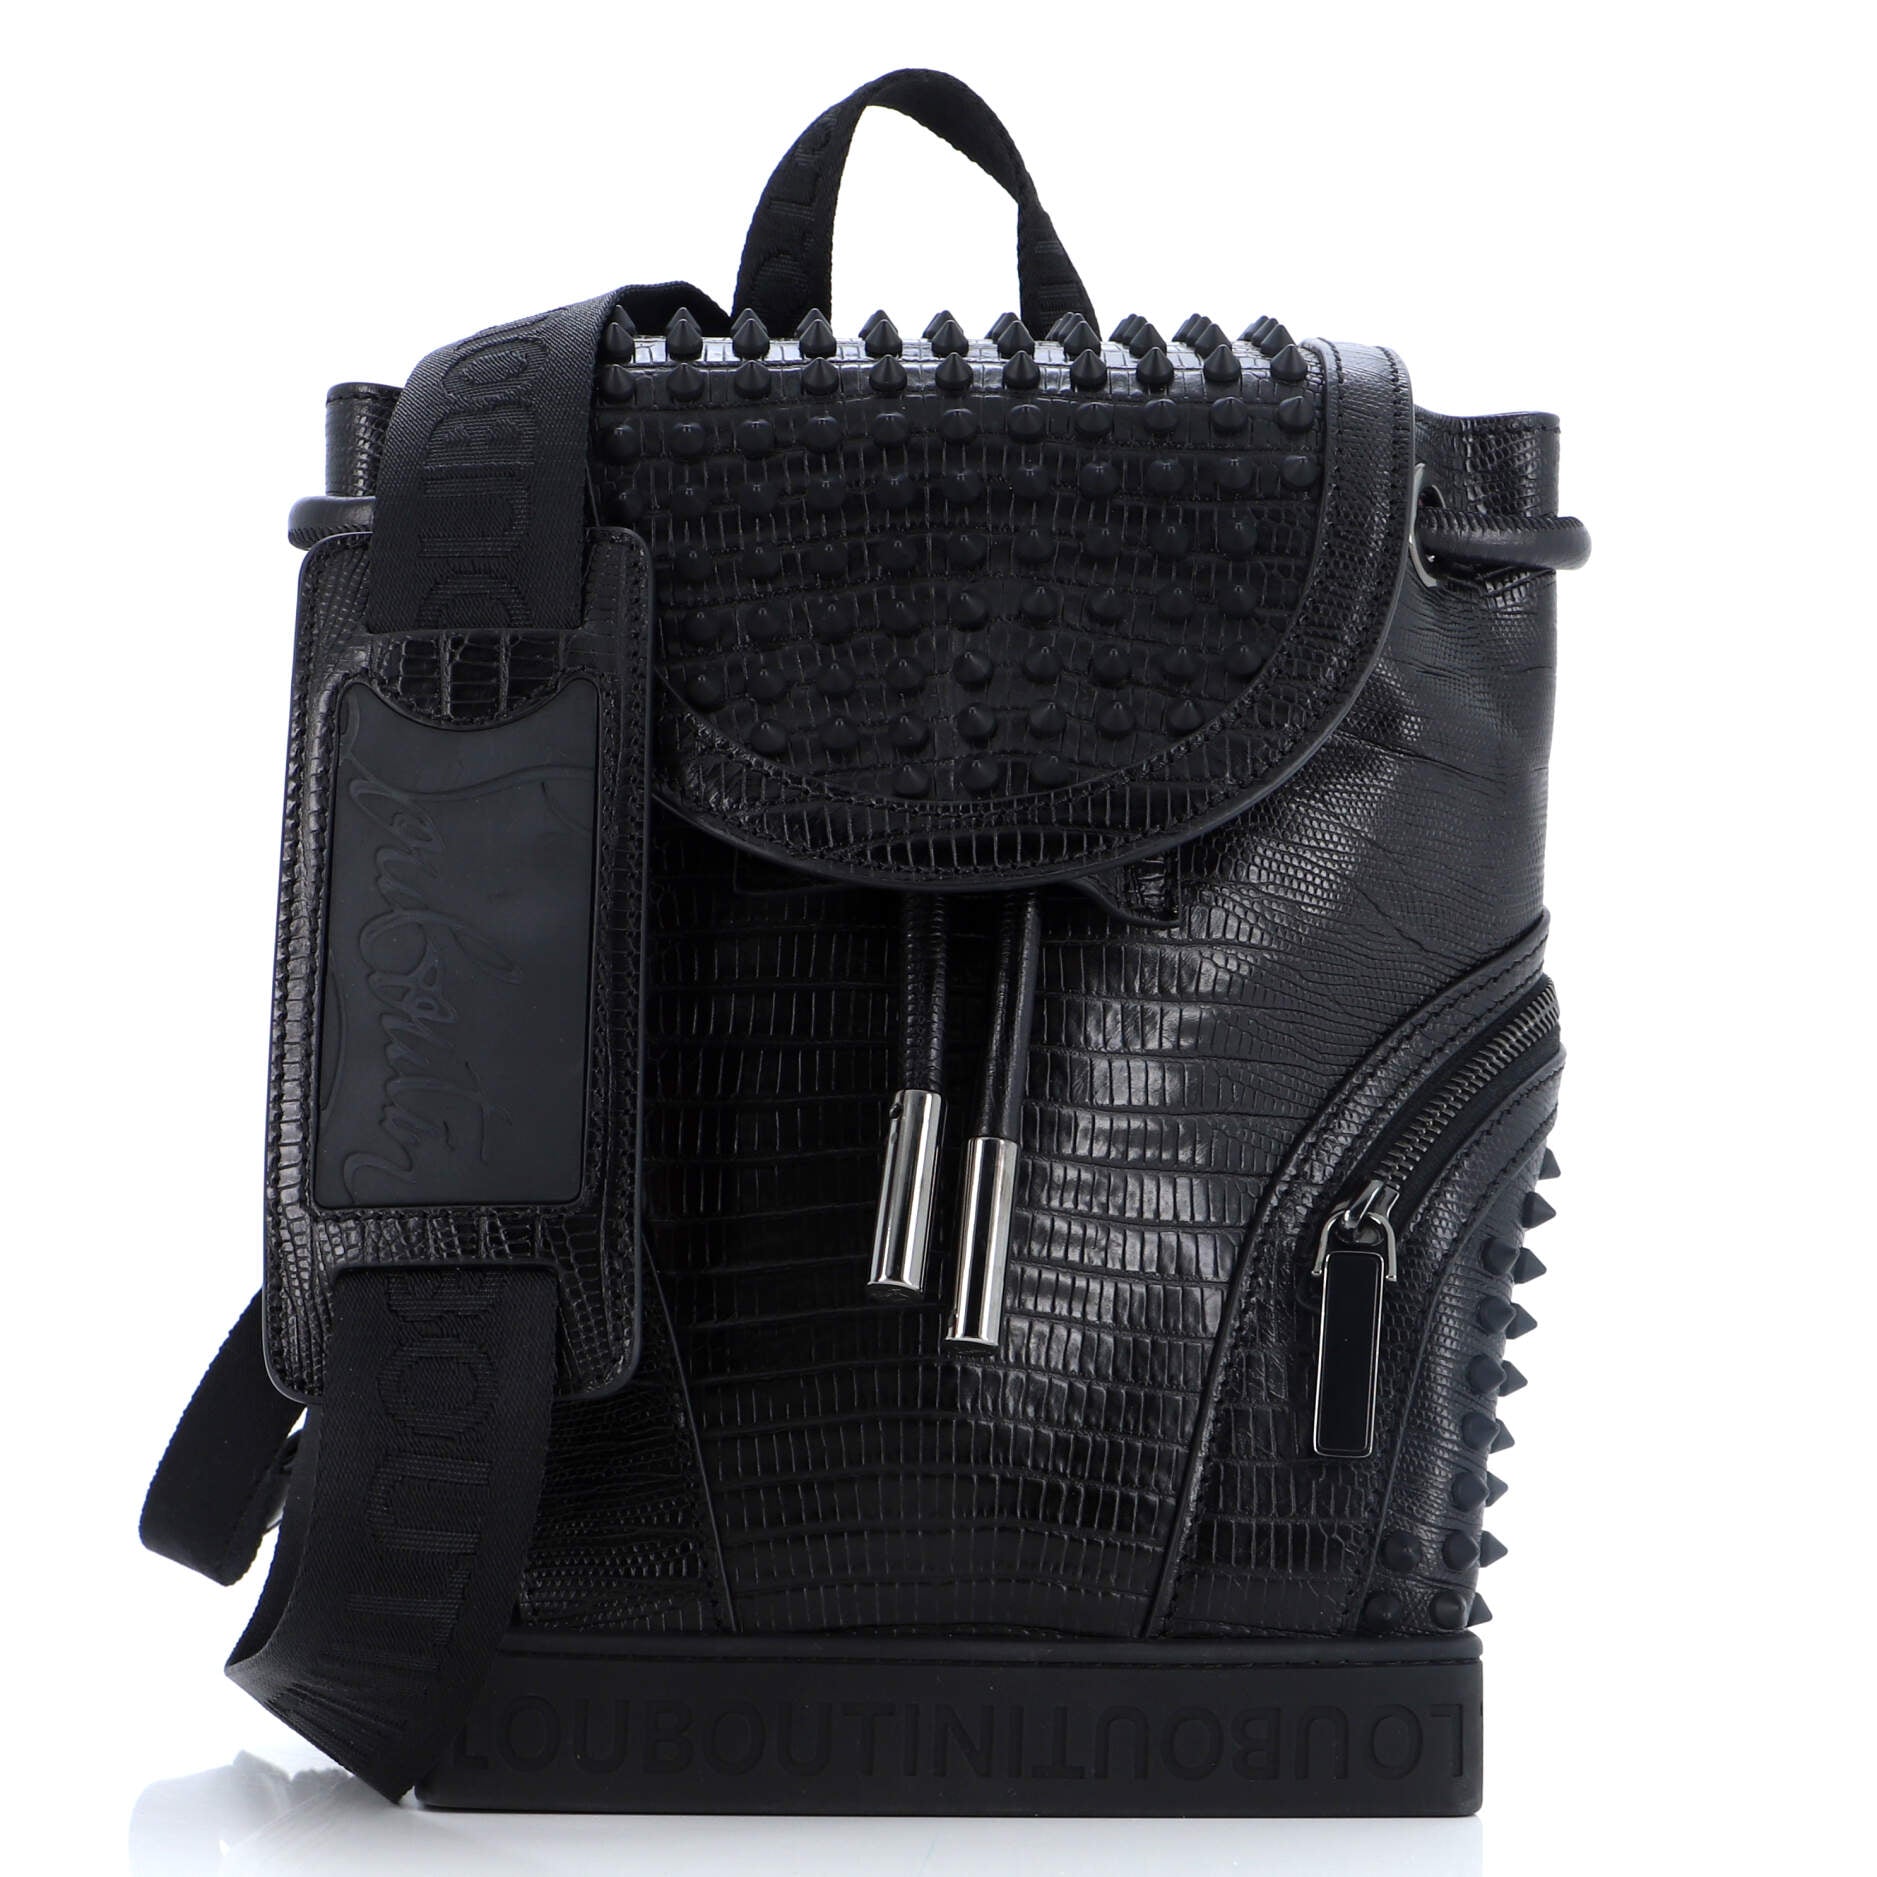 Explorafunk Backpack Spiked Leather Small